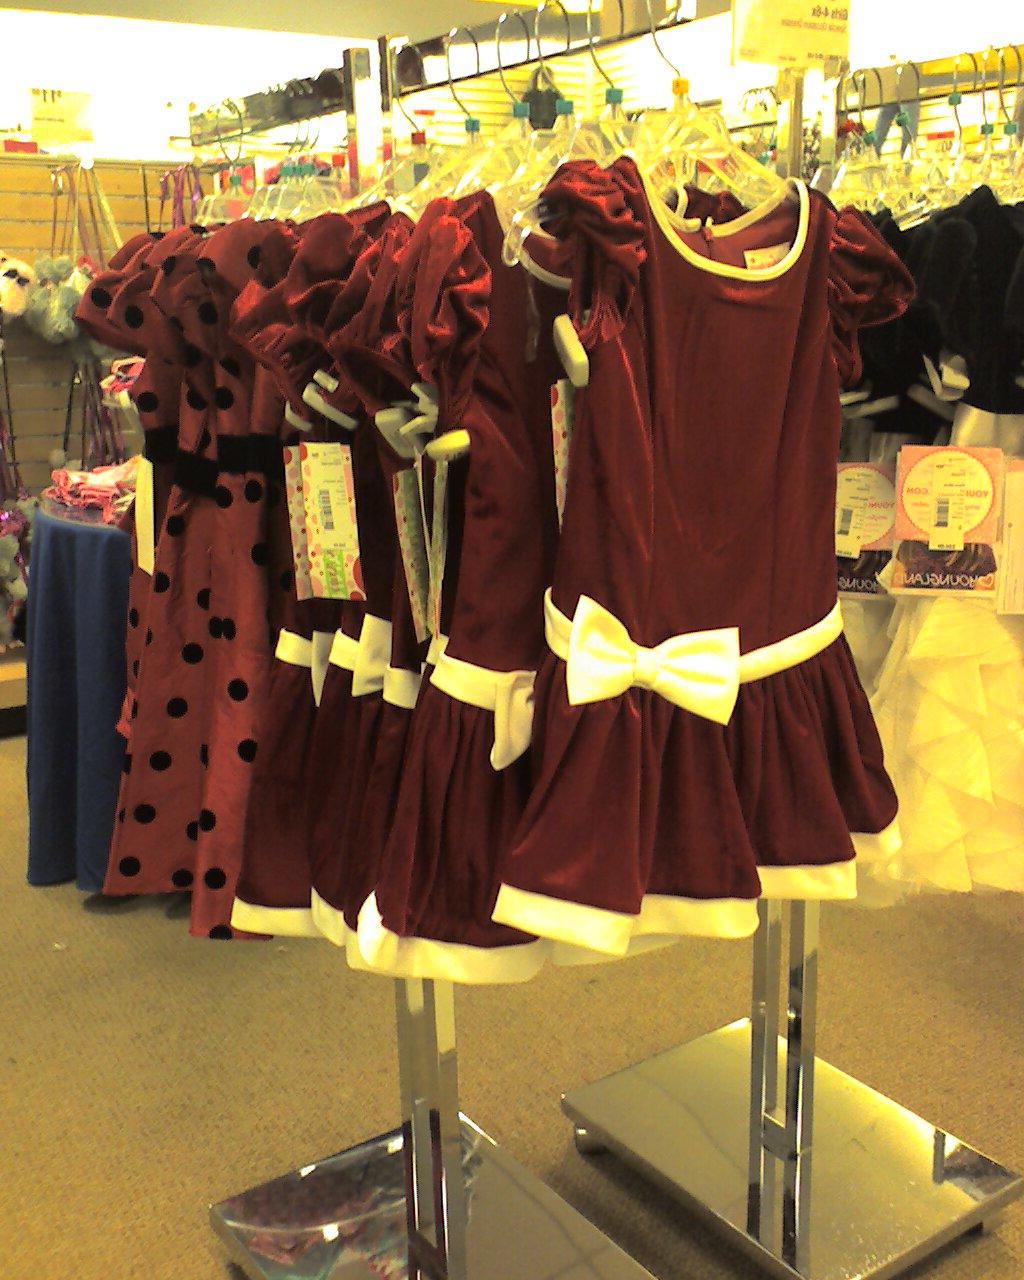 Christmas dresses out at Sears